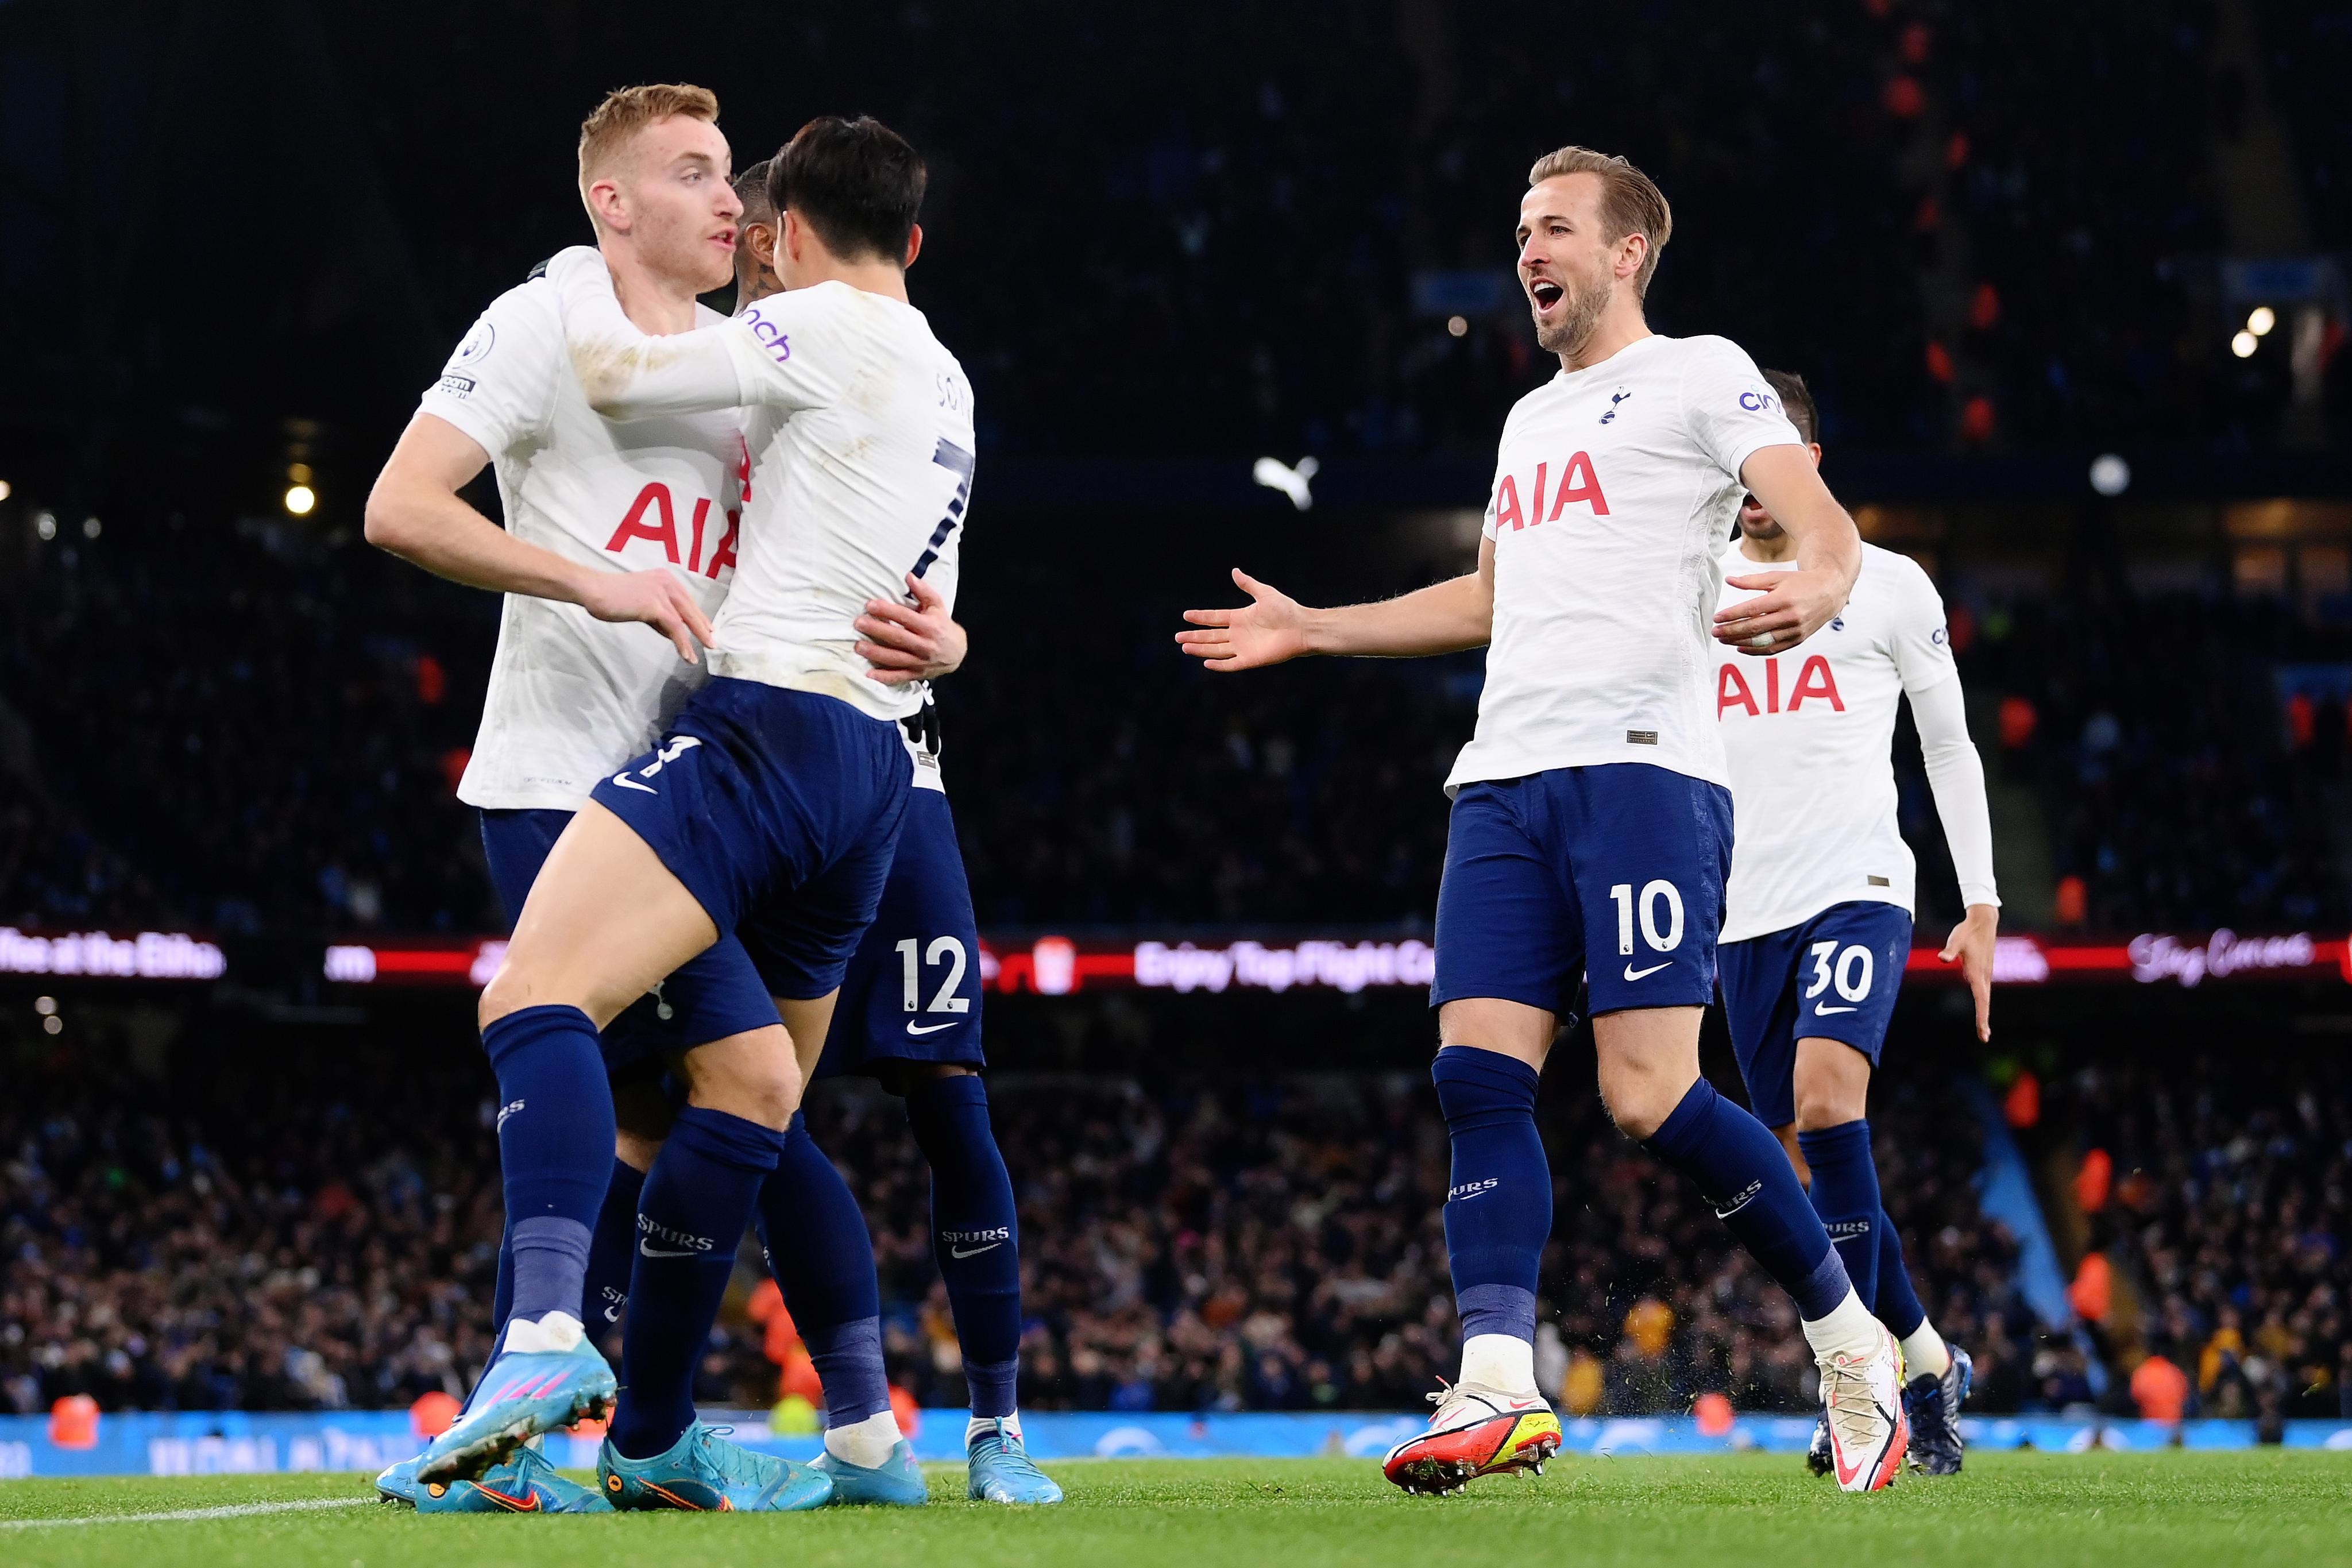 Manchester City 2-3 Tottenham Live: Late, late drama as Harry Kane scores in the 95th minute to secure a victory as Tottenham do the double over the league leaders